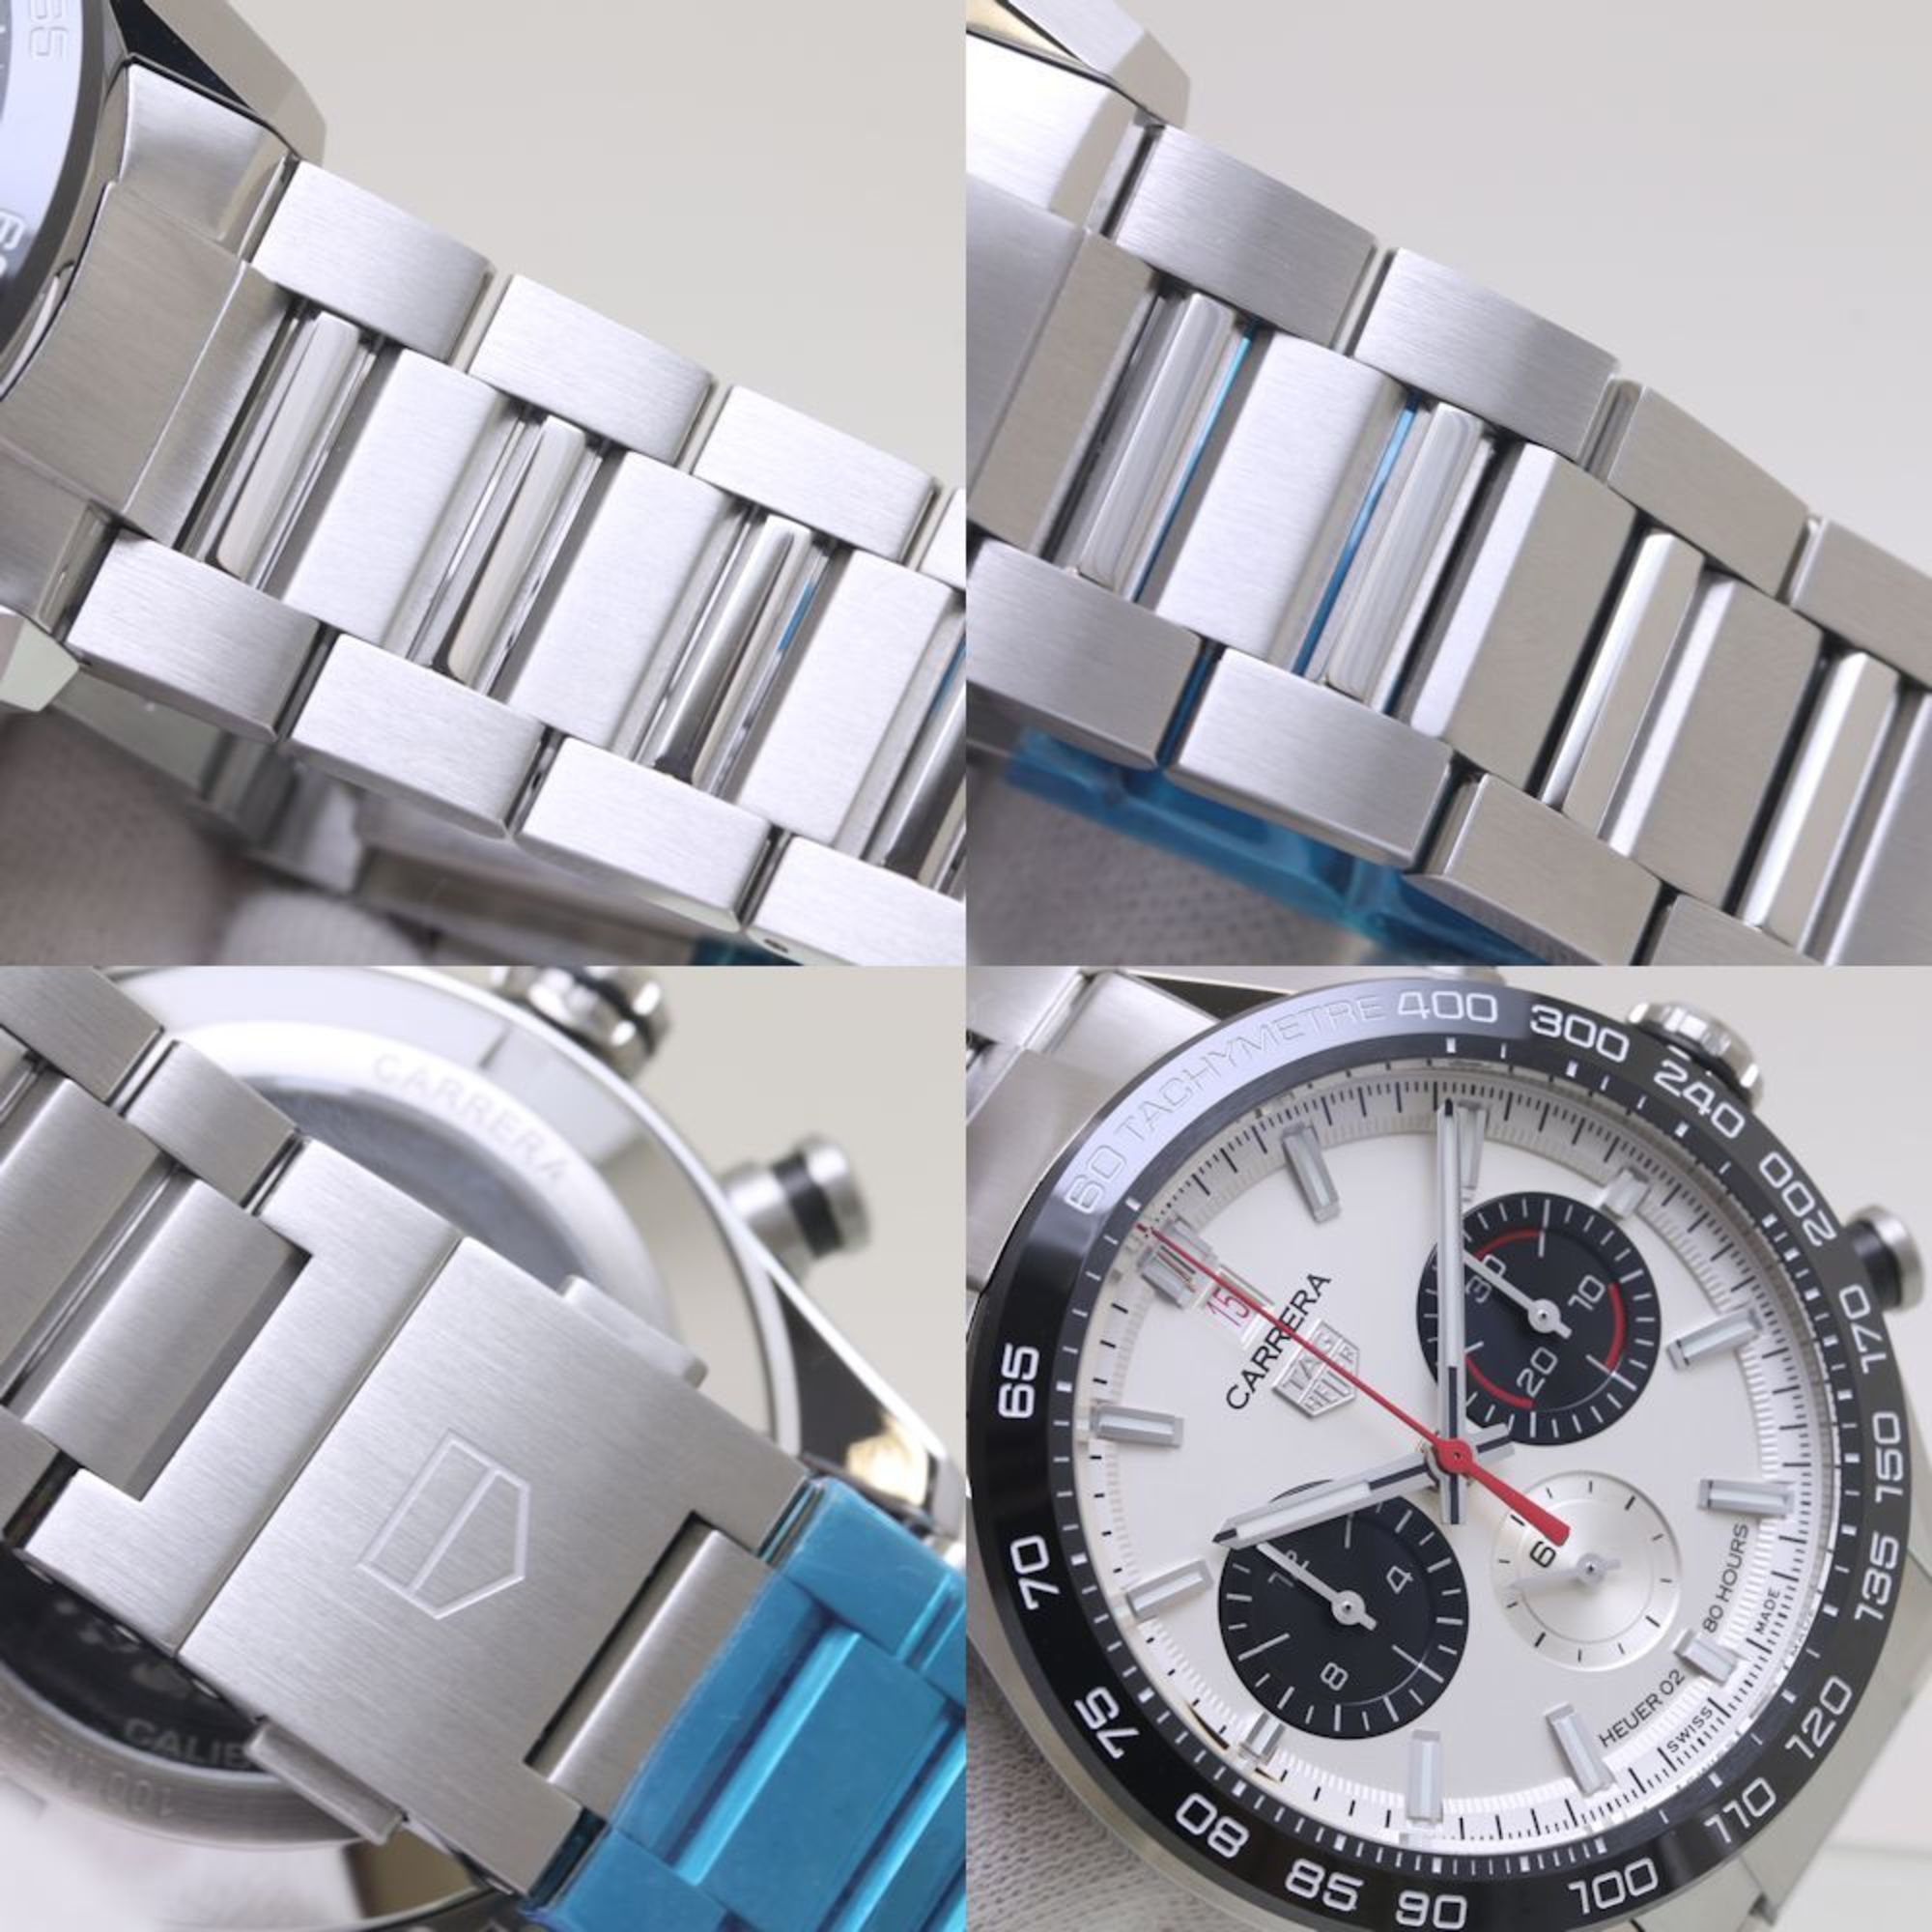 TAG HEUER Carrera Sport 160th Anniversary 1860 Pieces Limited CBN2A1D.BA0643 Stainless Steel Men's 39009